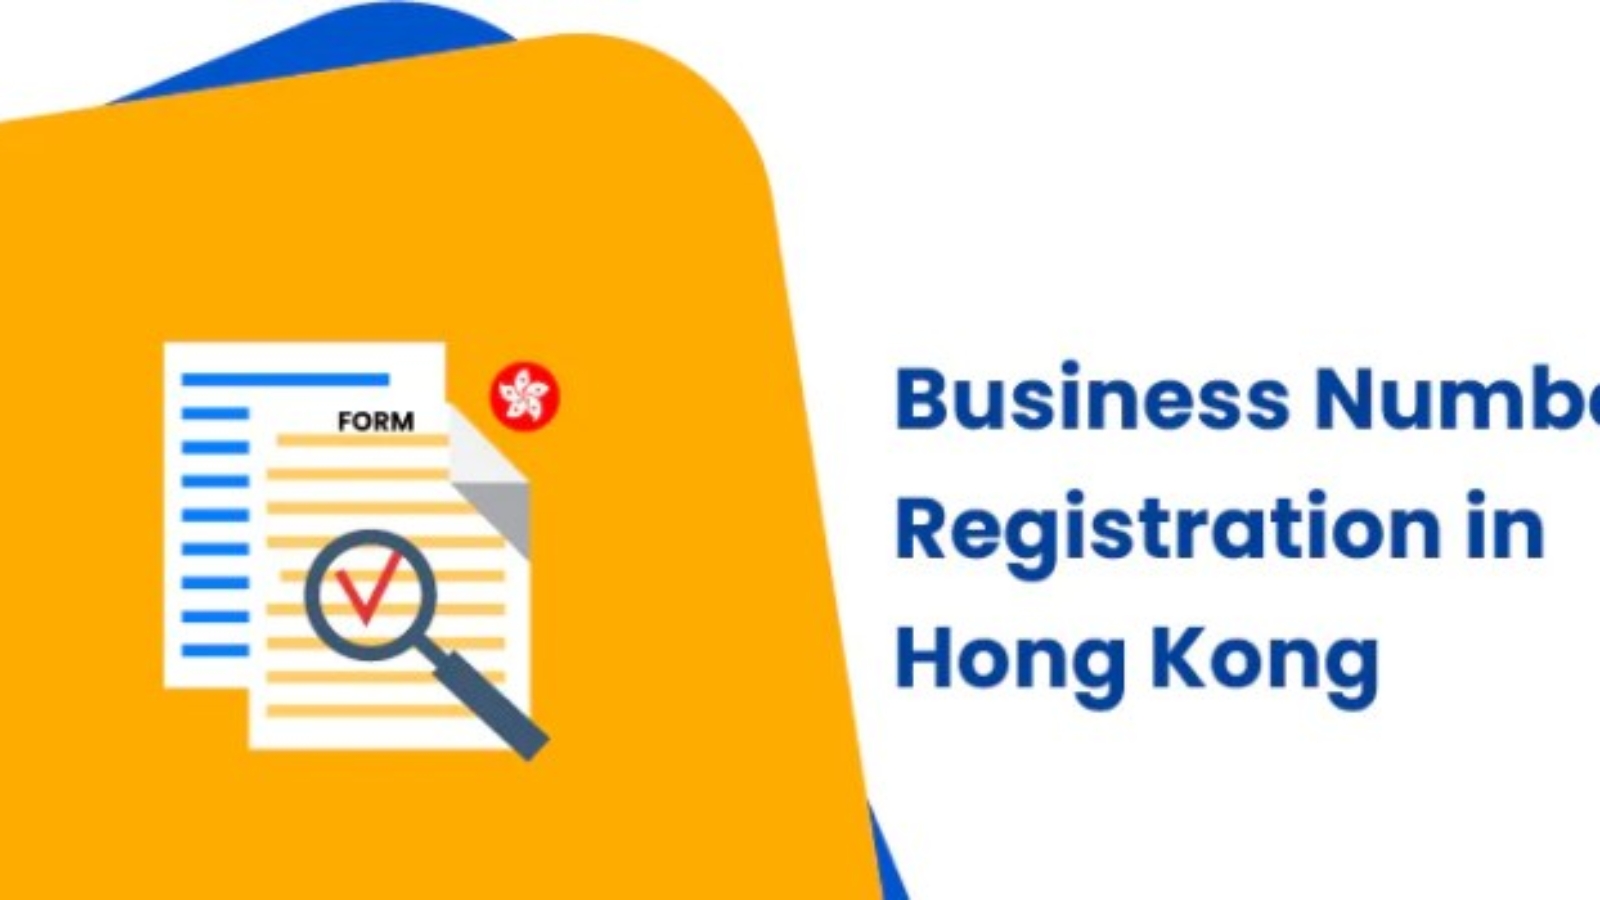 Company Registration Number in Hong Kong